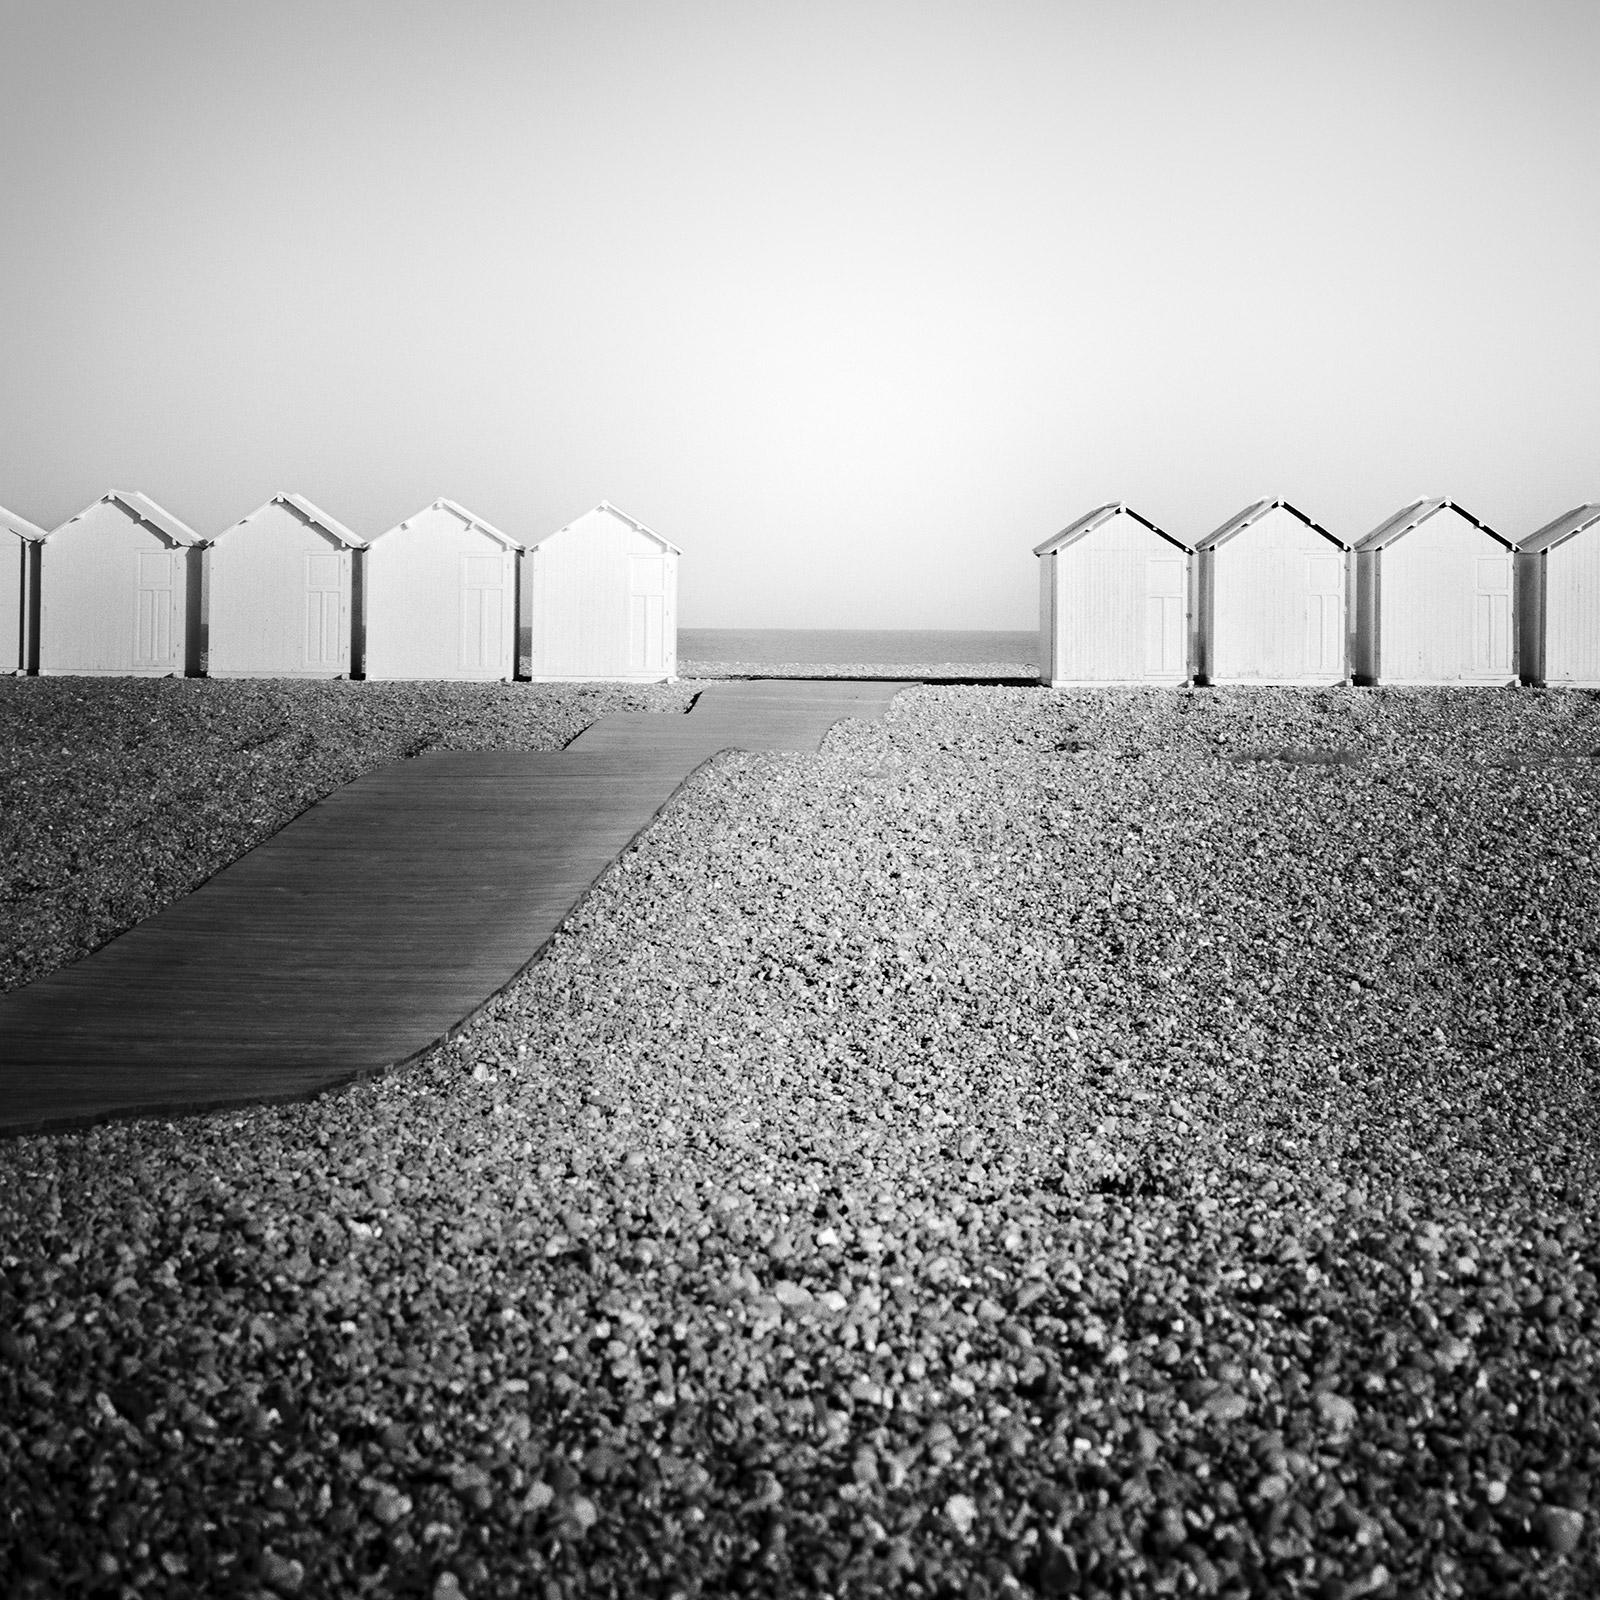 Wood Huts, Promenade, Rocky Beach, France, black and white landscape photography